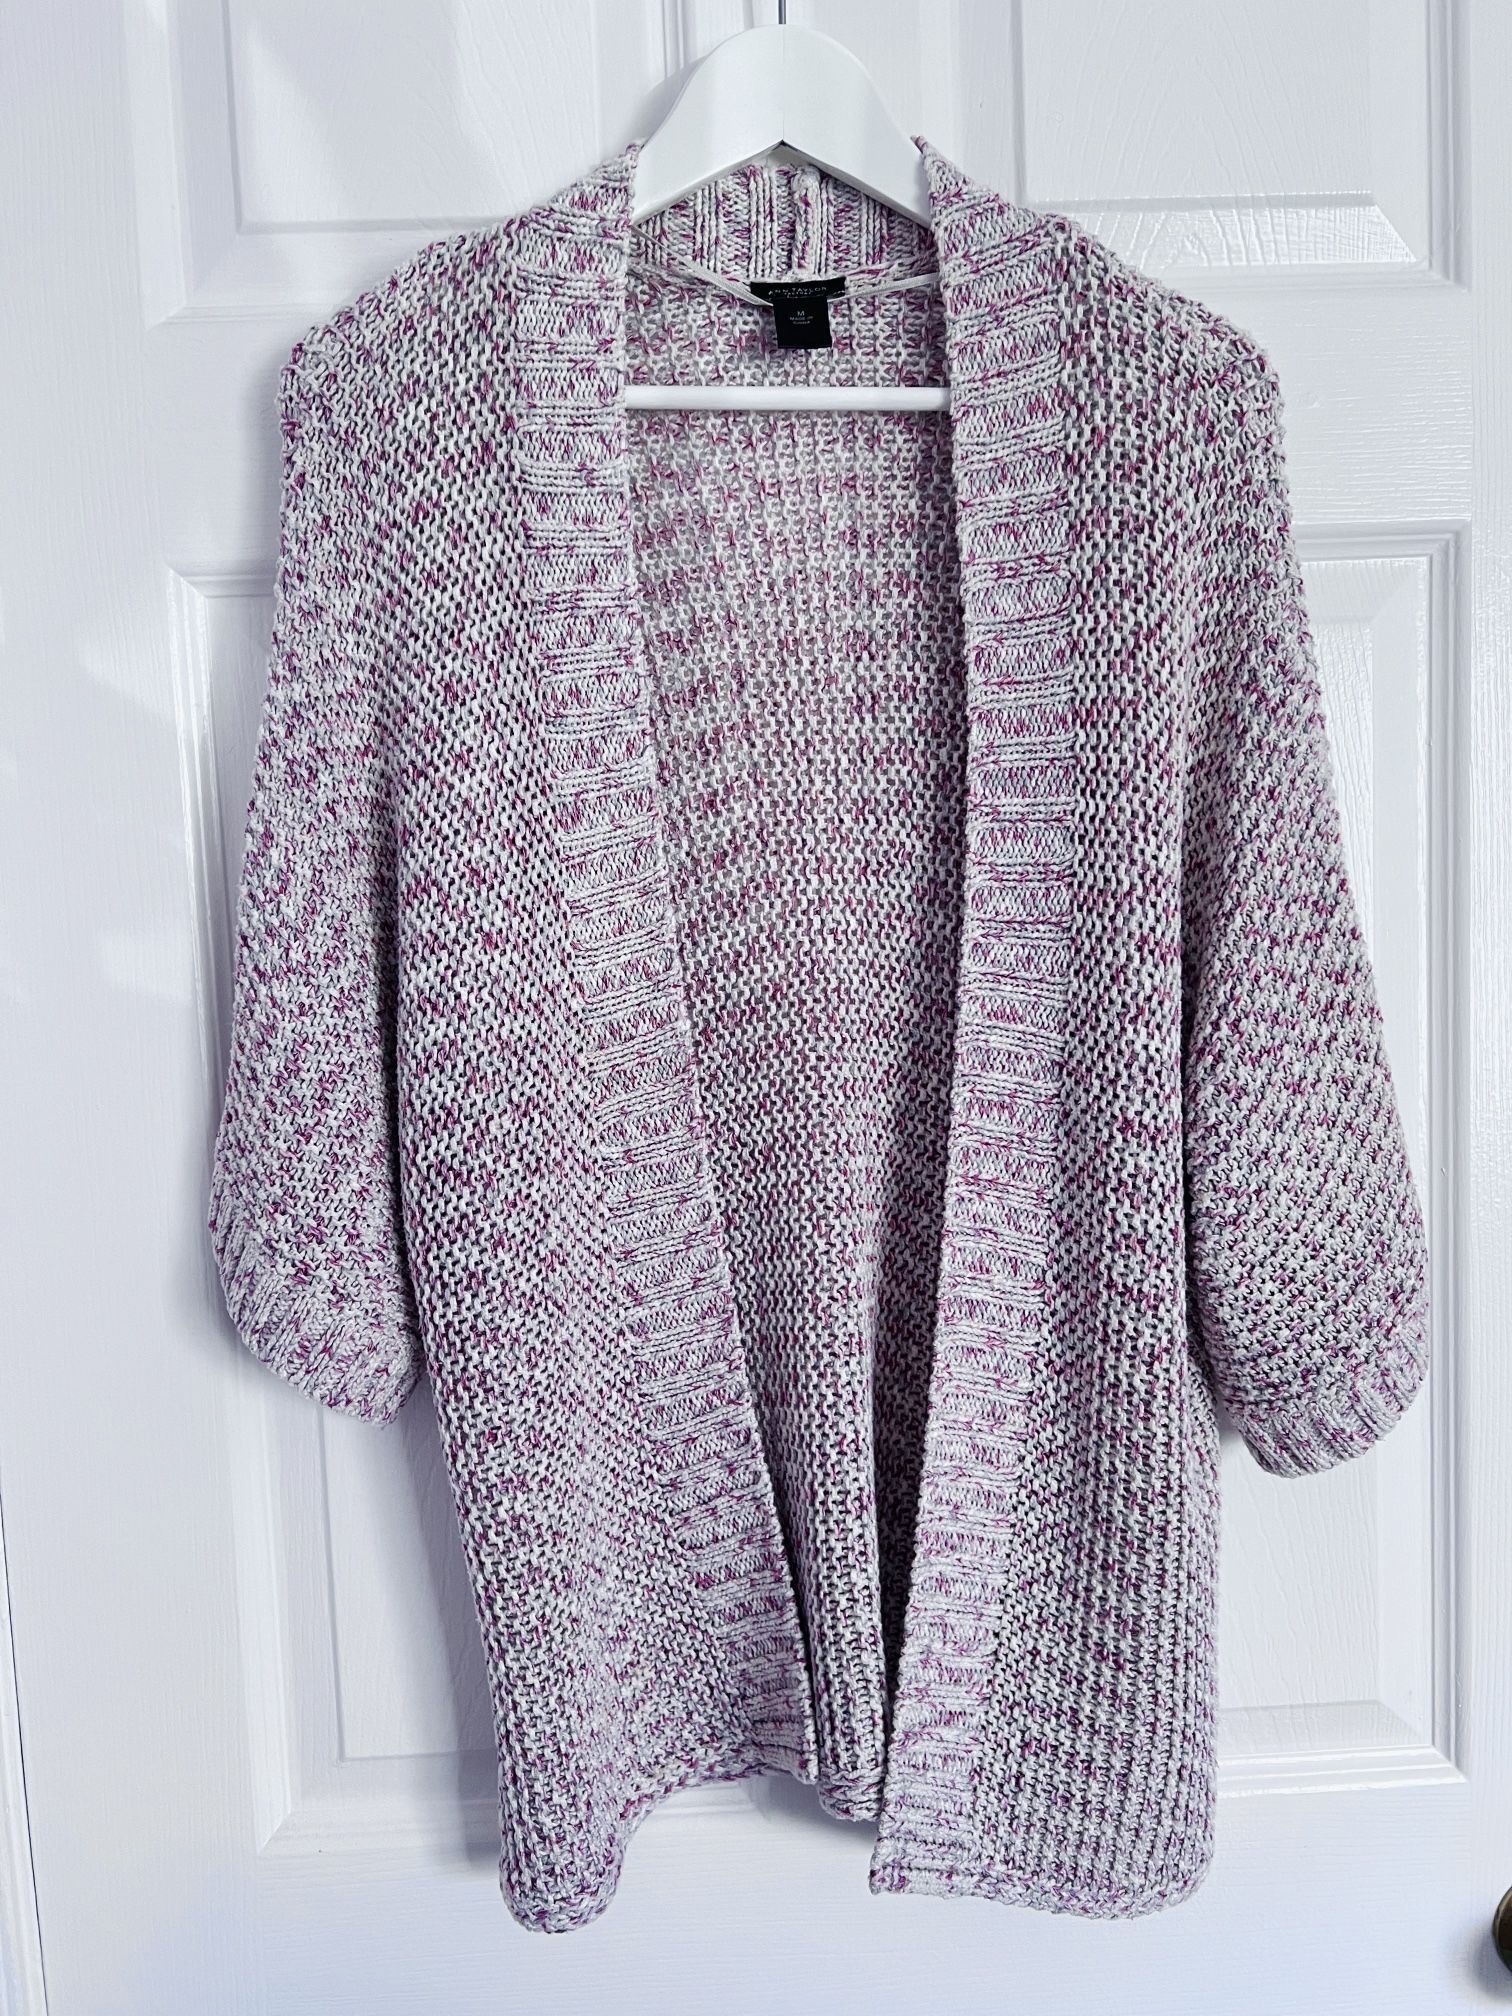 Japanese-style knitted cardigan